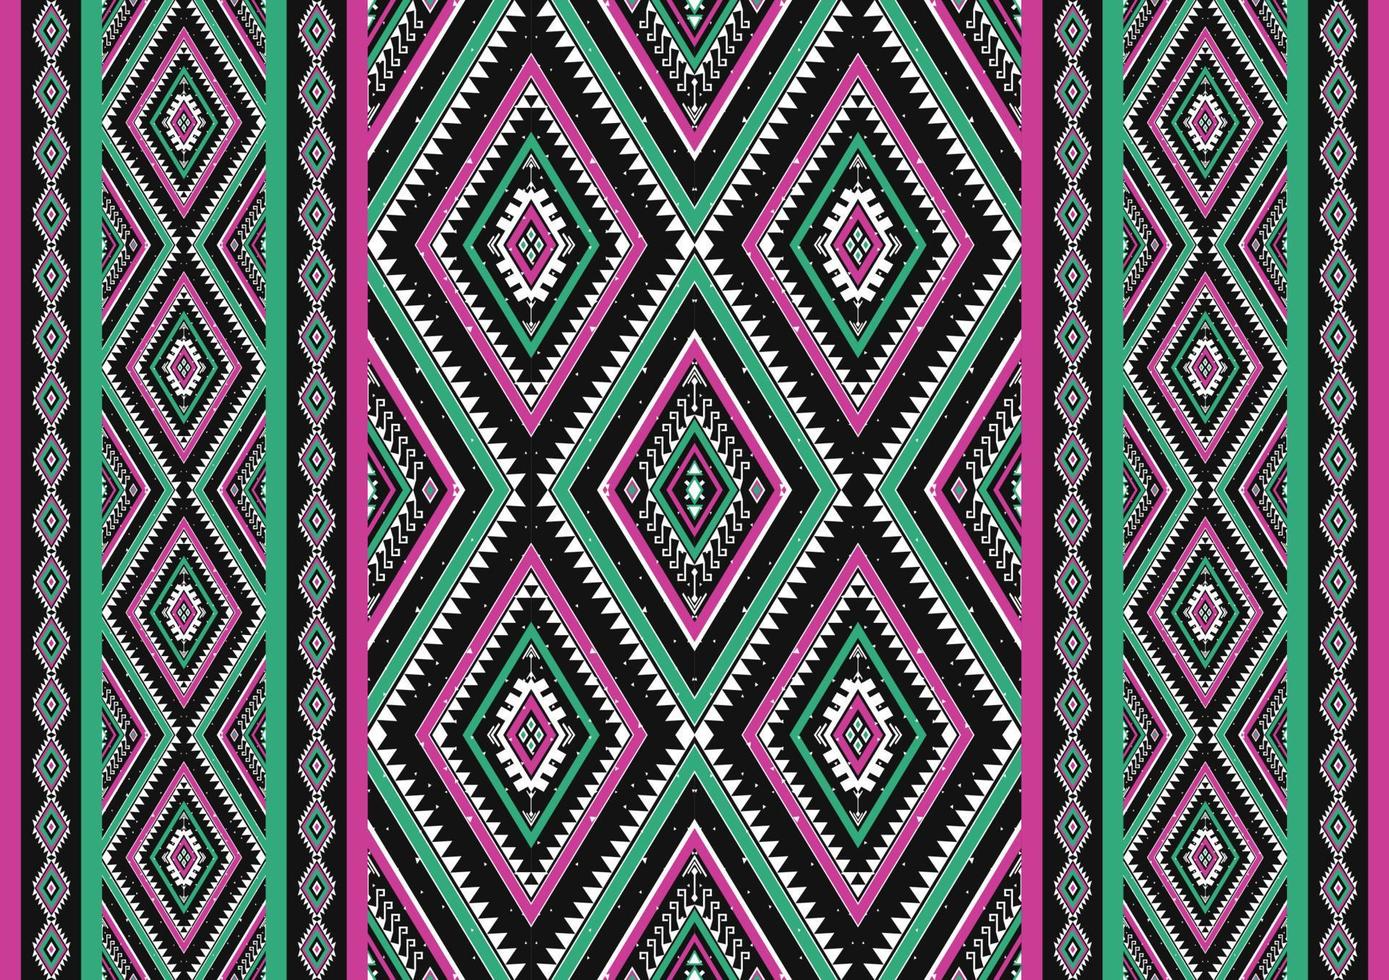 Ethnic geometric oriental seamless pattern traditional. Tribal style striped. Design for background, wallpaper, vector illustration, fabric, clothing, batik, carpet, embroidery.